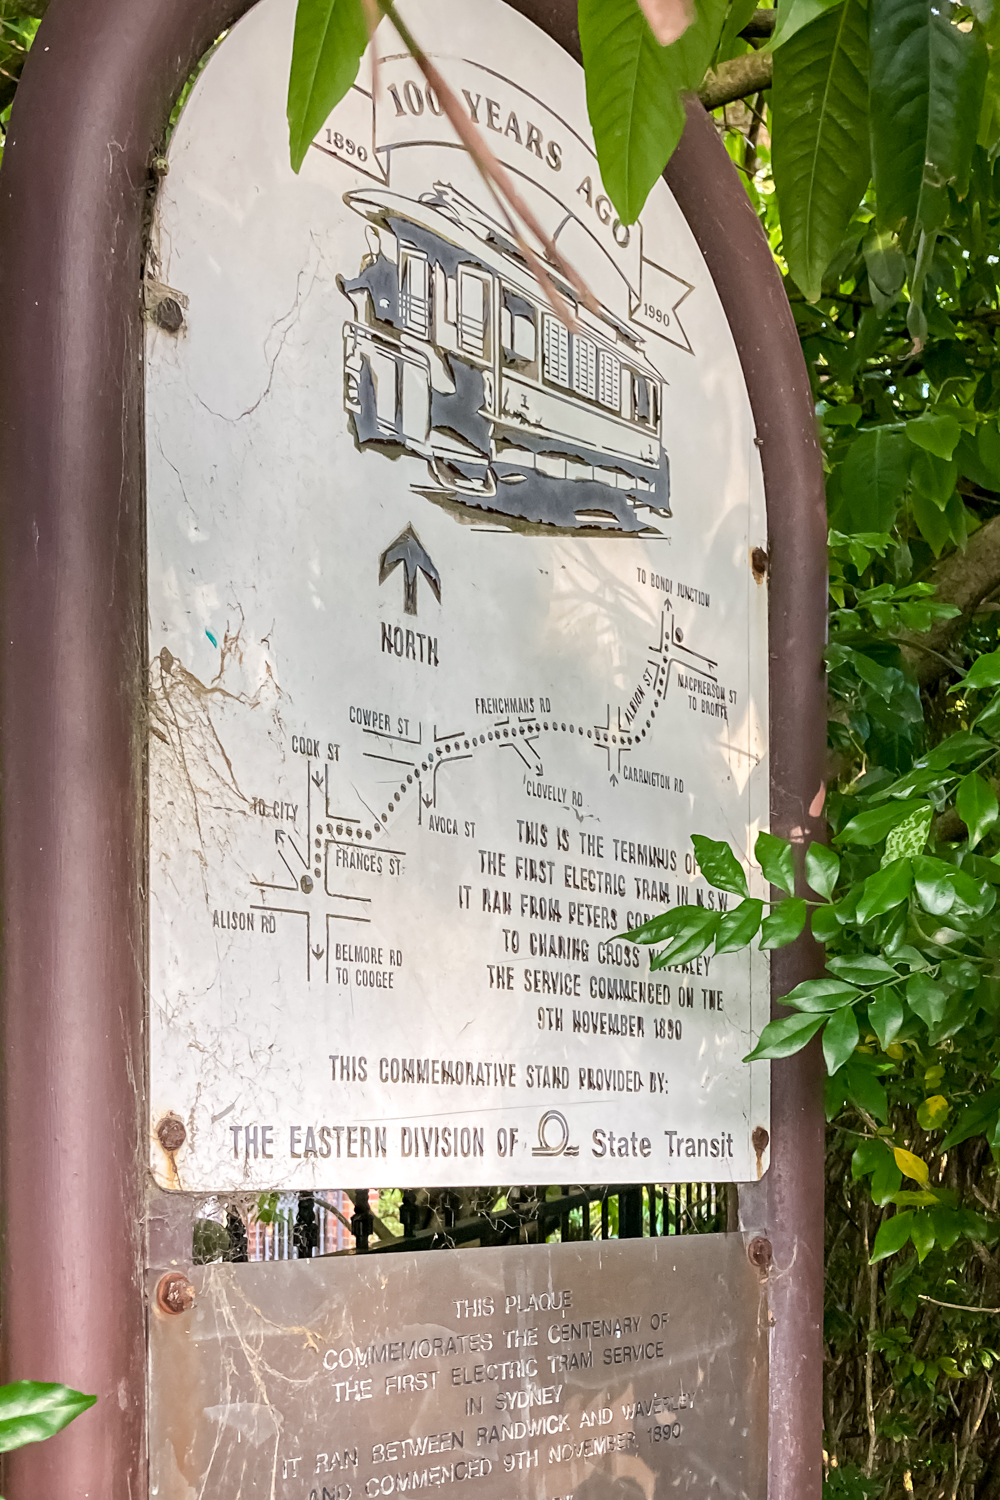 A sign commemorating the site of the first electric train in NSW running between Randwick and Waverley in November 1890